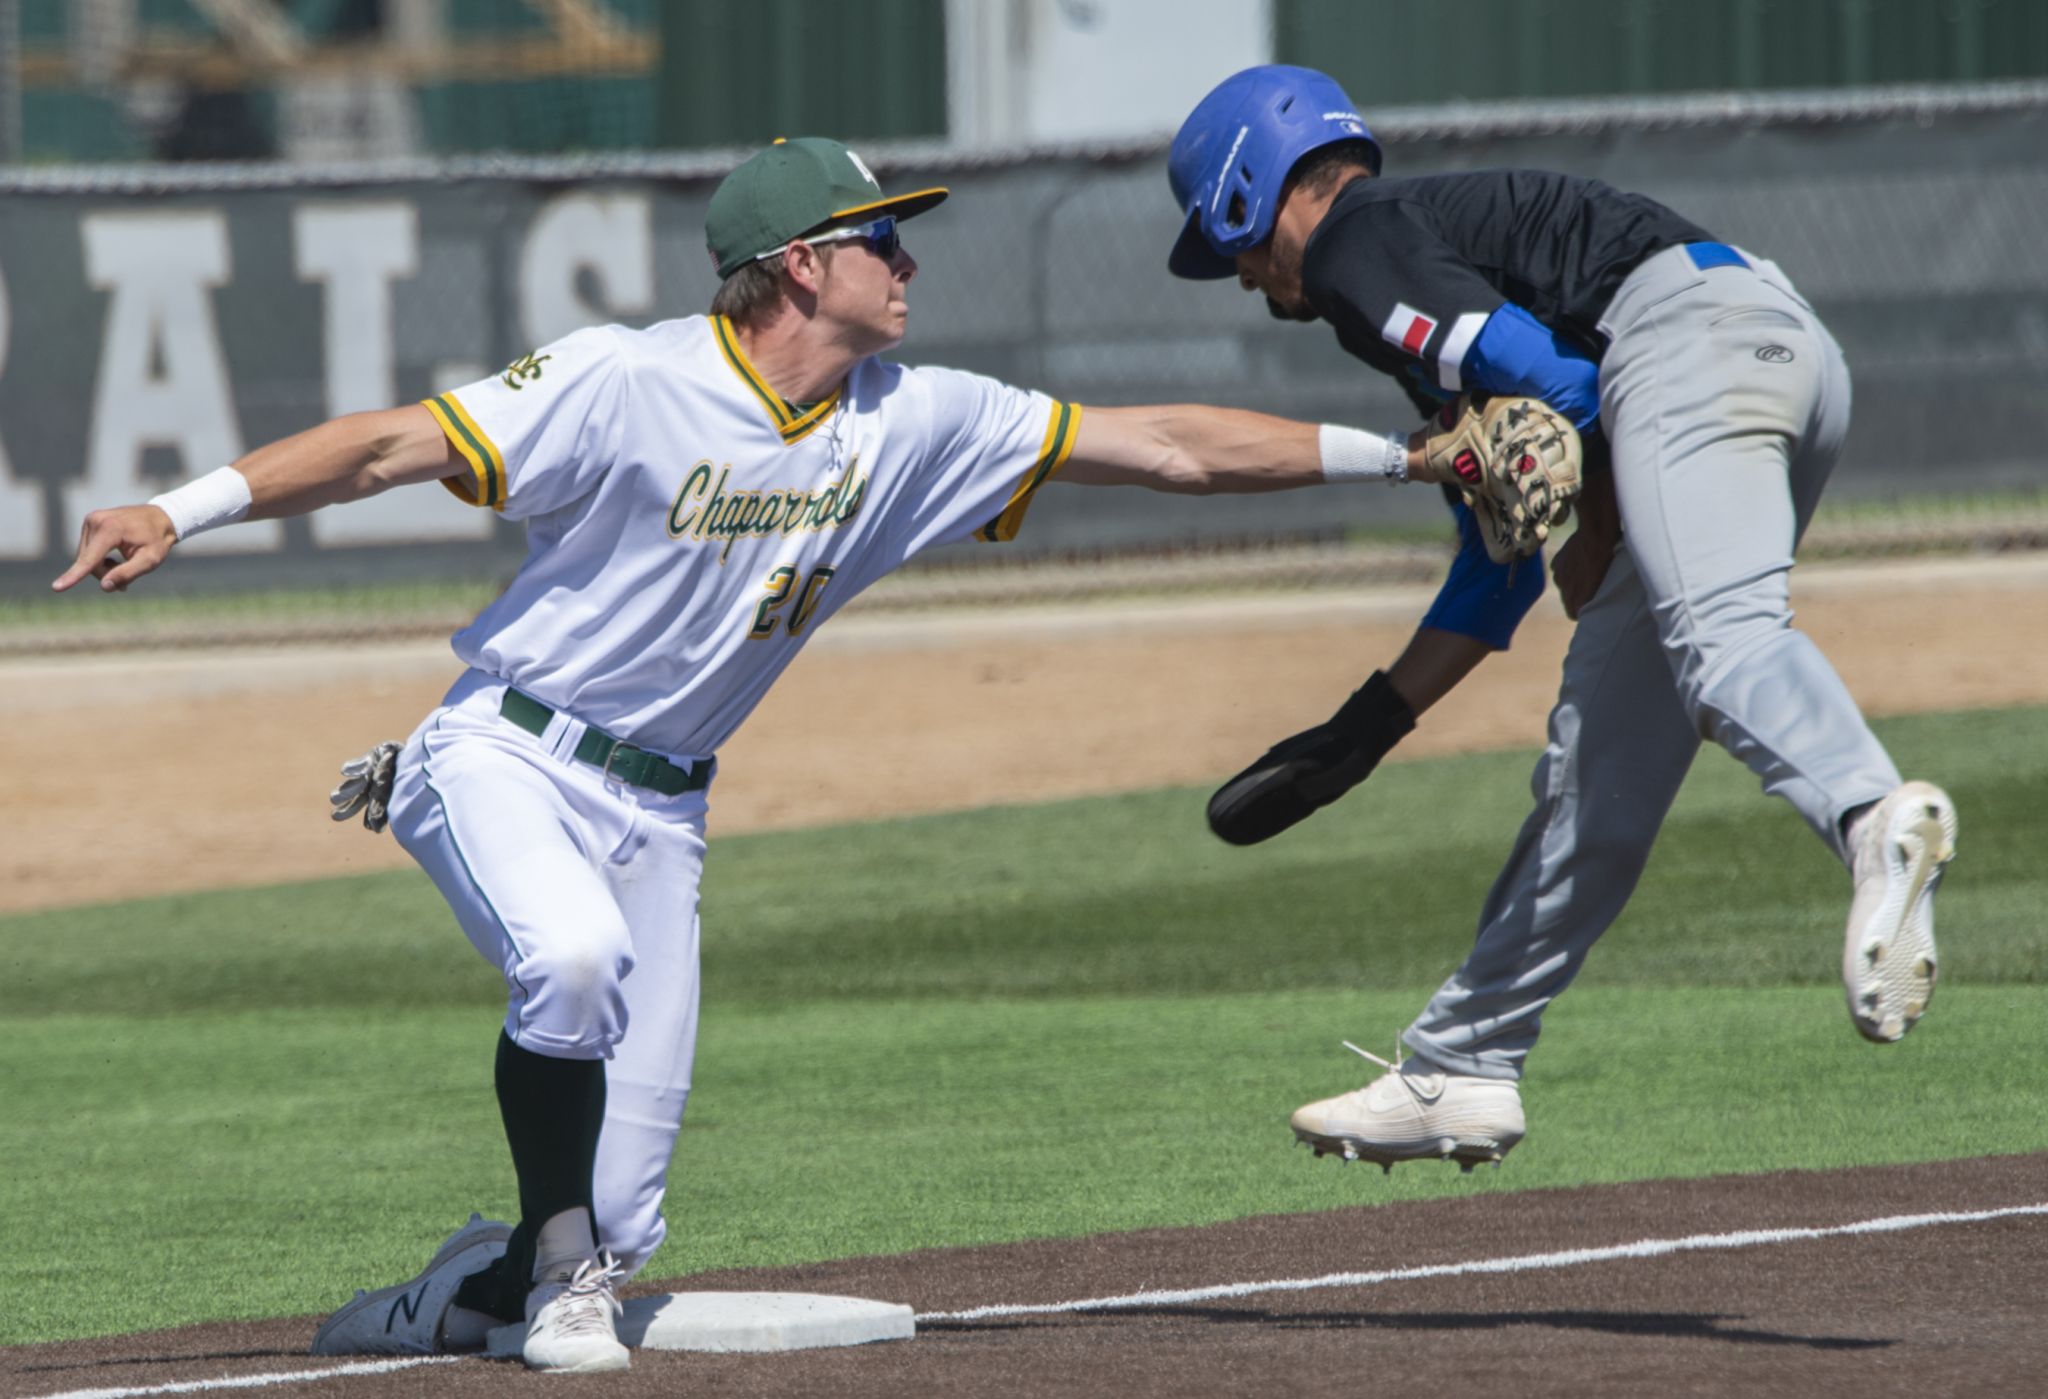 JC BASEBALL: Mann leads Chaps to series win over Westerners